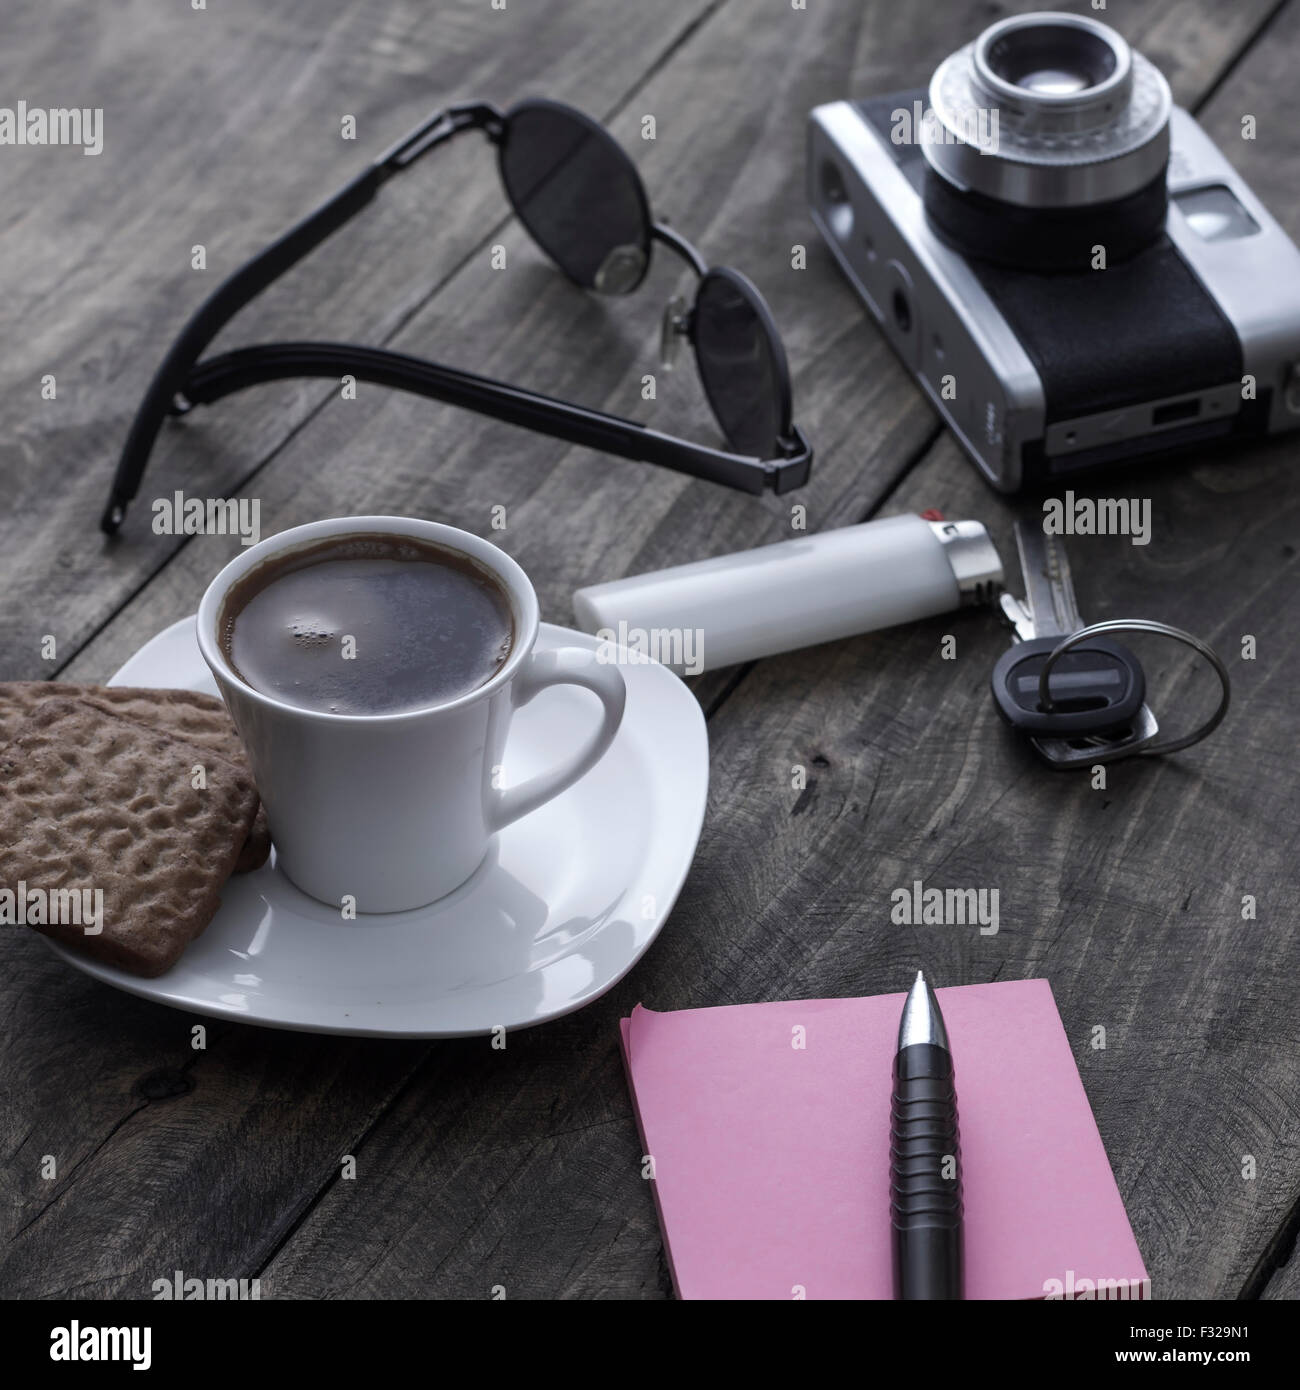 Analogue photo camera on a table with coffee and paper notes Stock Photo